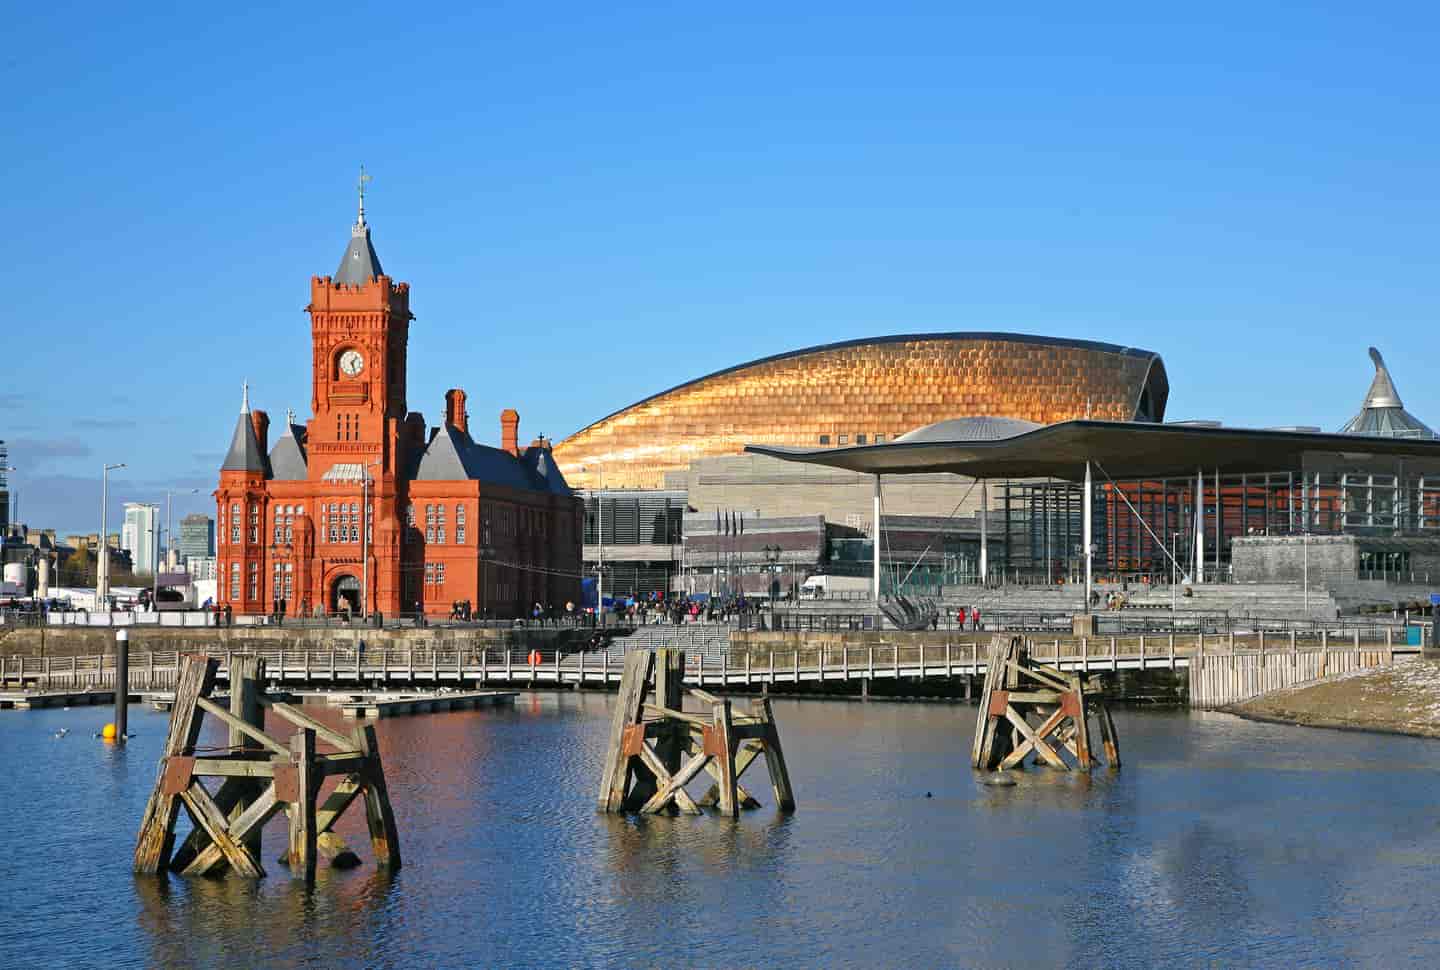 Student Accommodation in Cardiff - The Pierhead Building and Armadillo in Cardiff Bay